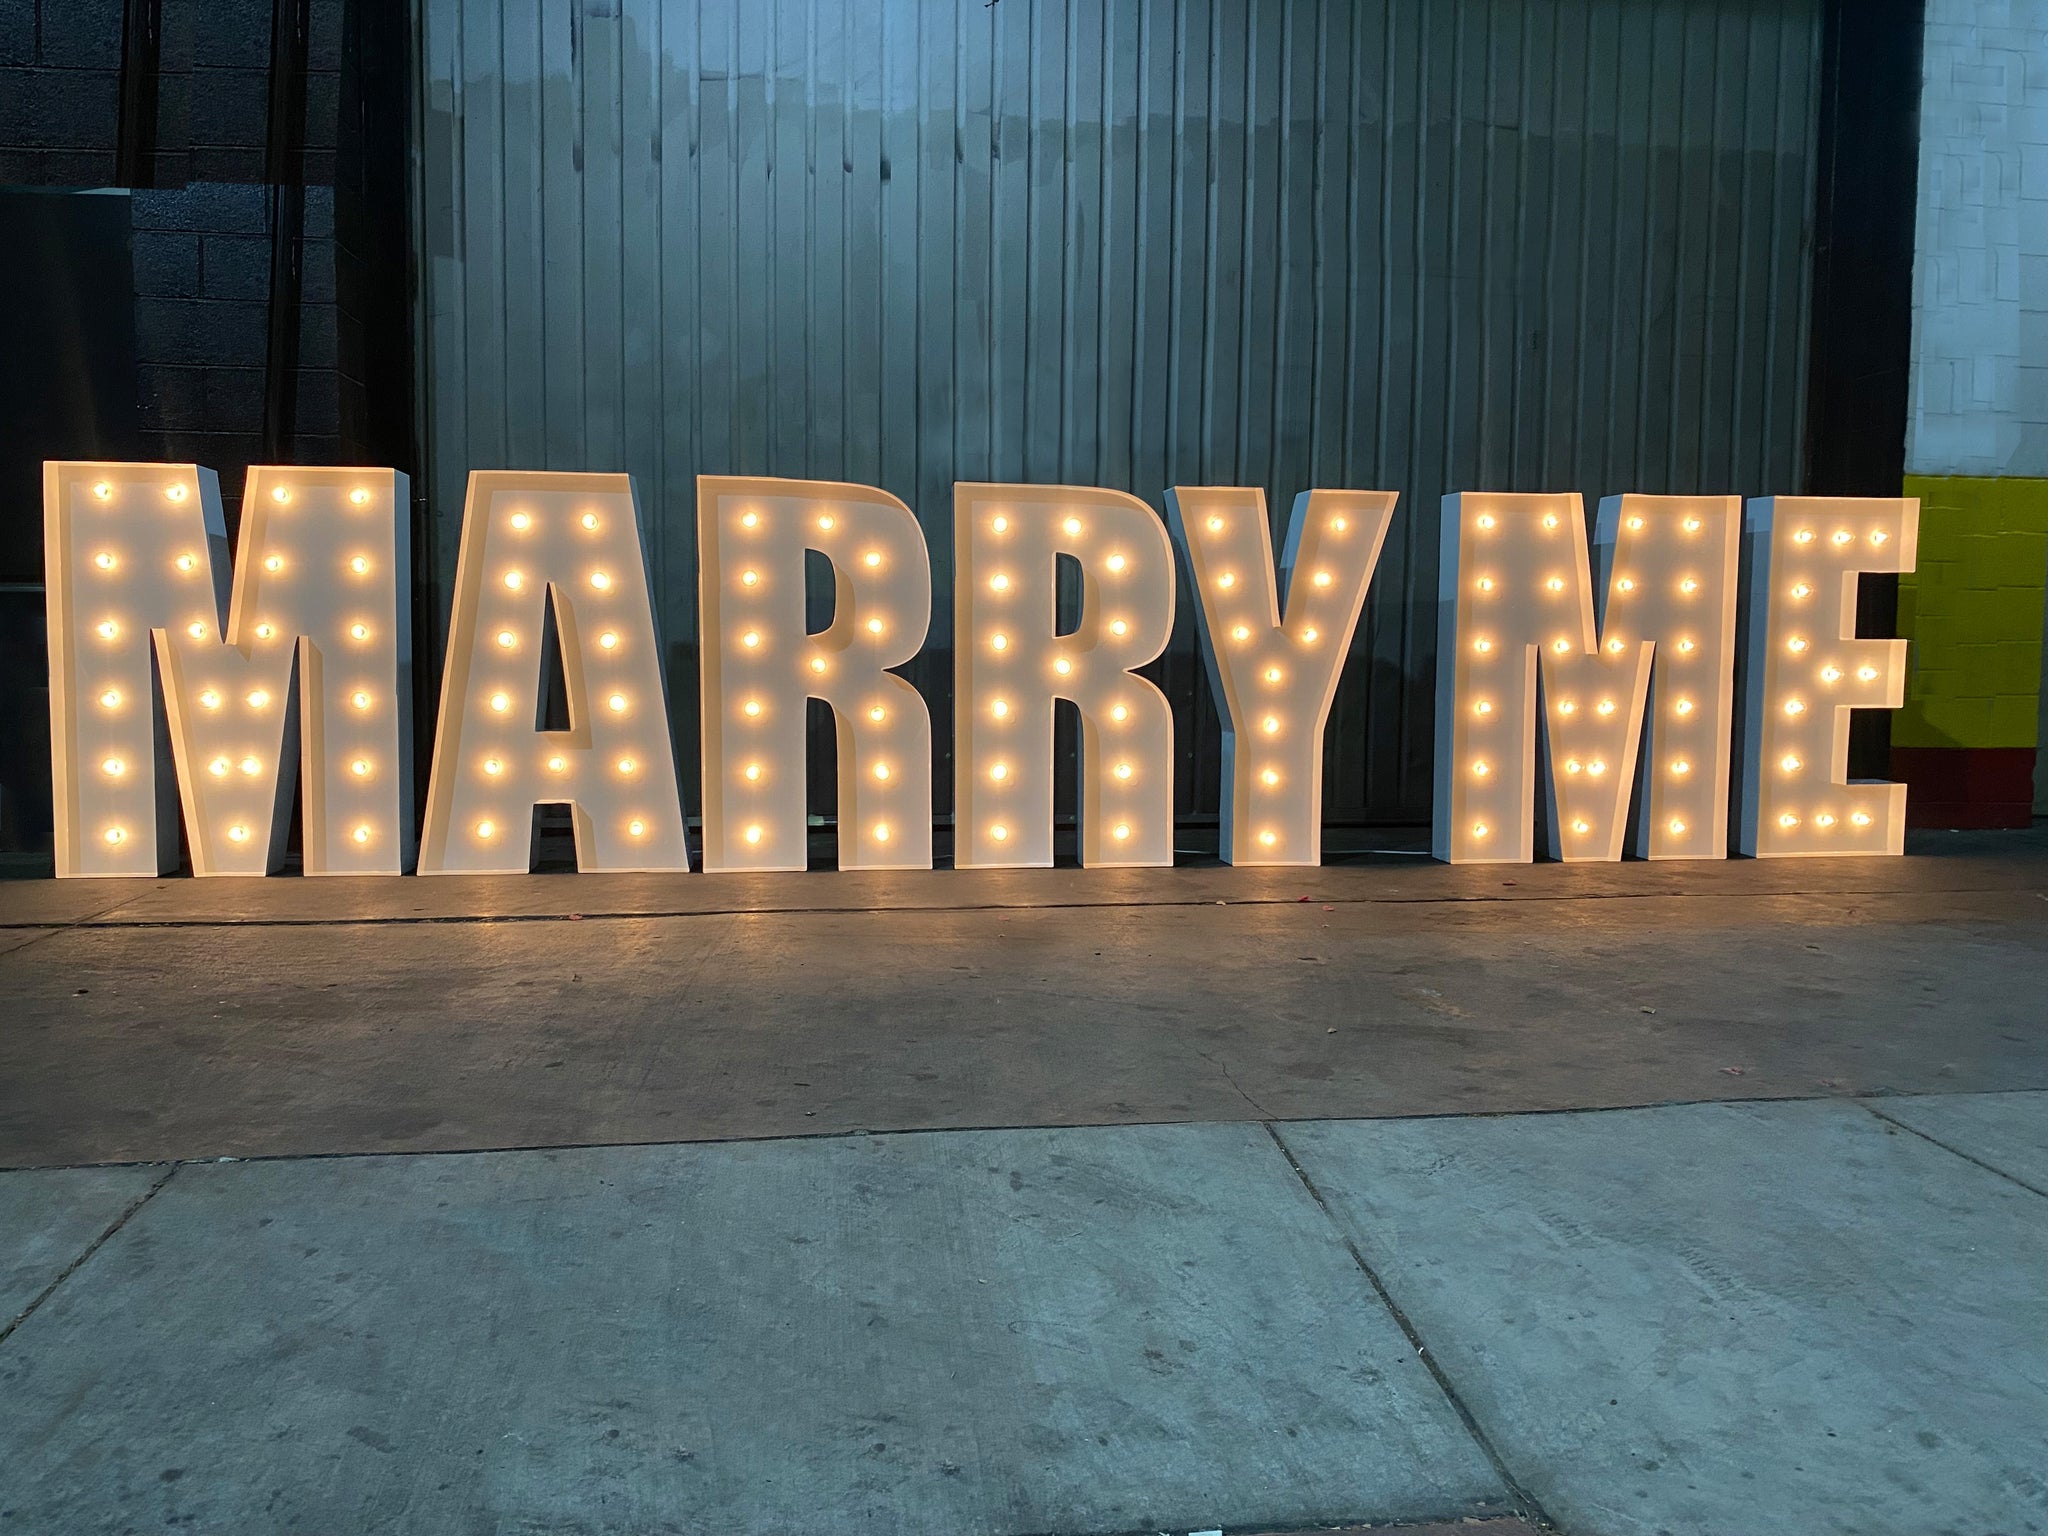 Giant Marry Me Letters 4ft 5t tall | Marry Me Sign | Marry Me Light Up Letters for Proposal Decorations